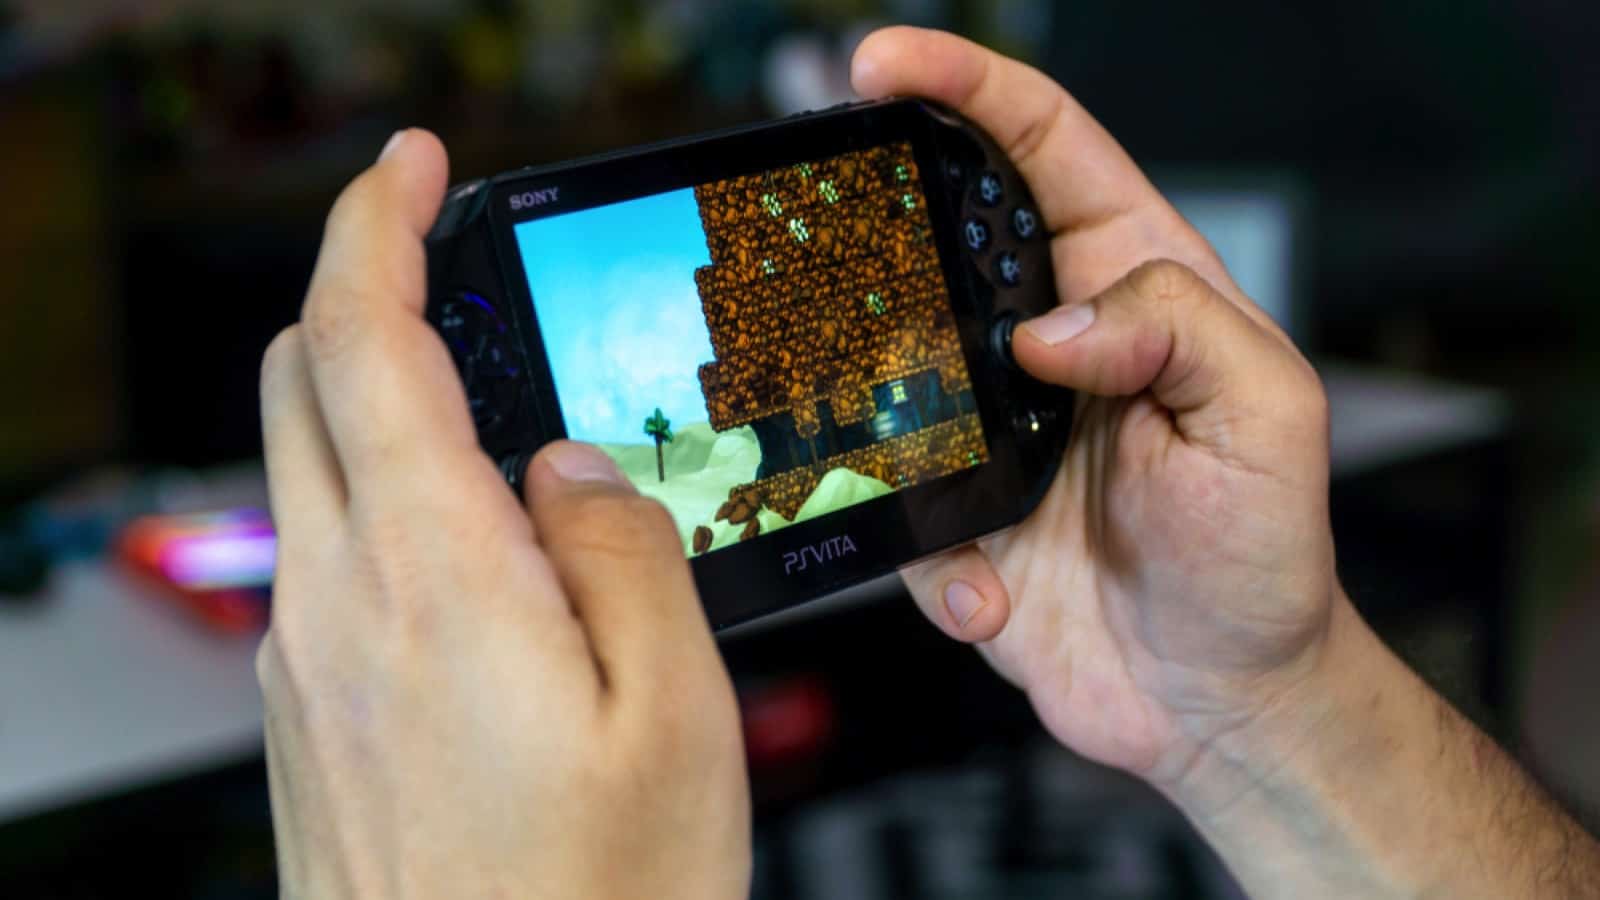 Istanbul, Turkey - November 2019: Guy playing Spelunky on Sony PS Vita - handheld playstation gaming console